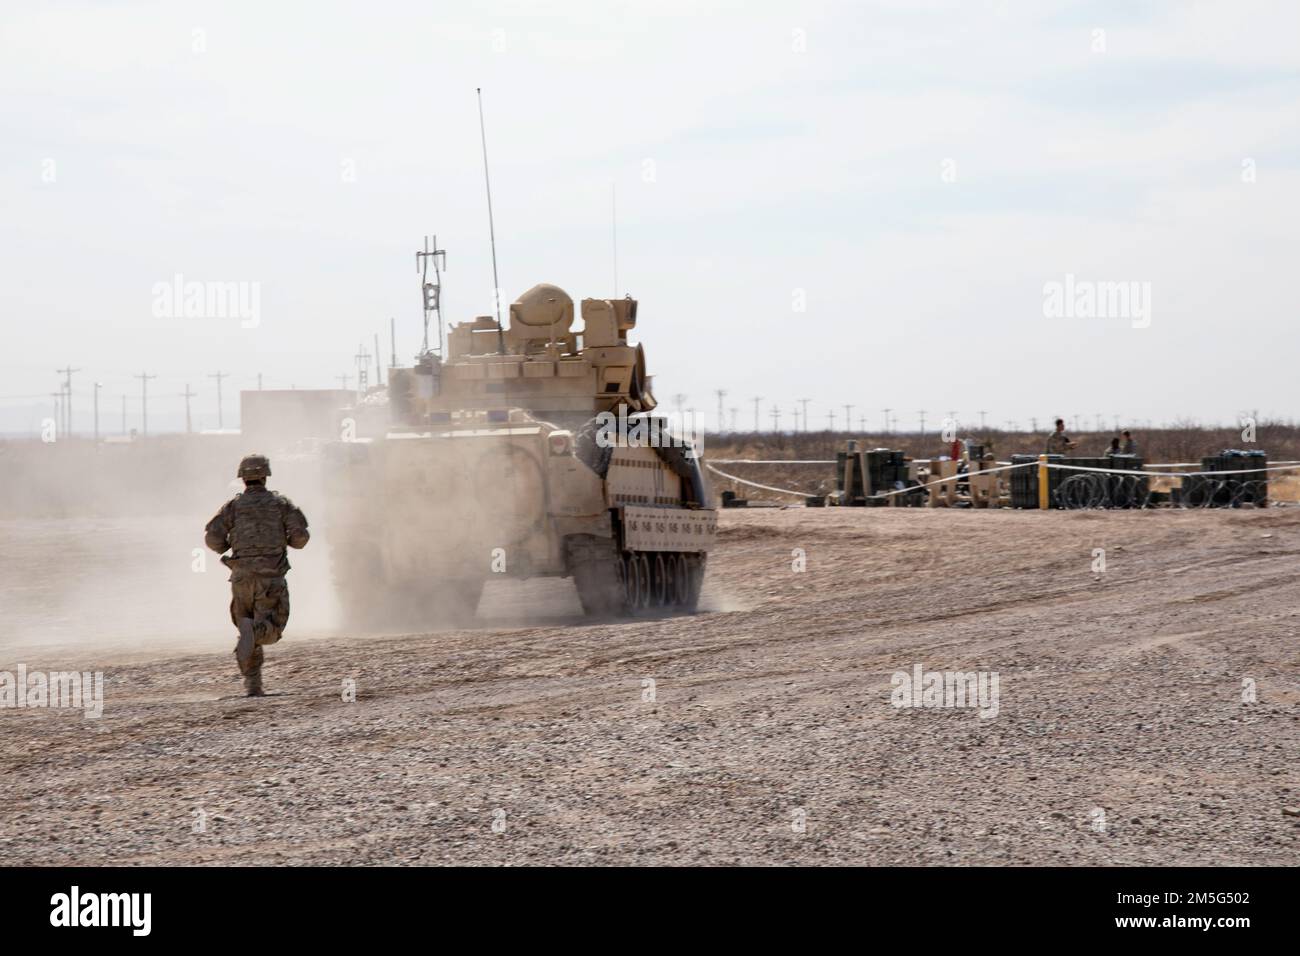 A Soldier from 2nd Armored Brigade Combat Team, 1st Armored Division brings up the rear as he helps escort a Bradley Fighting Vehicle off the gunnery range near Fort Bliss, Texas, on March 16, 2022. 2nd BDE is performing gunnery tables for upcoming training events. Stock Photo